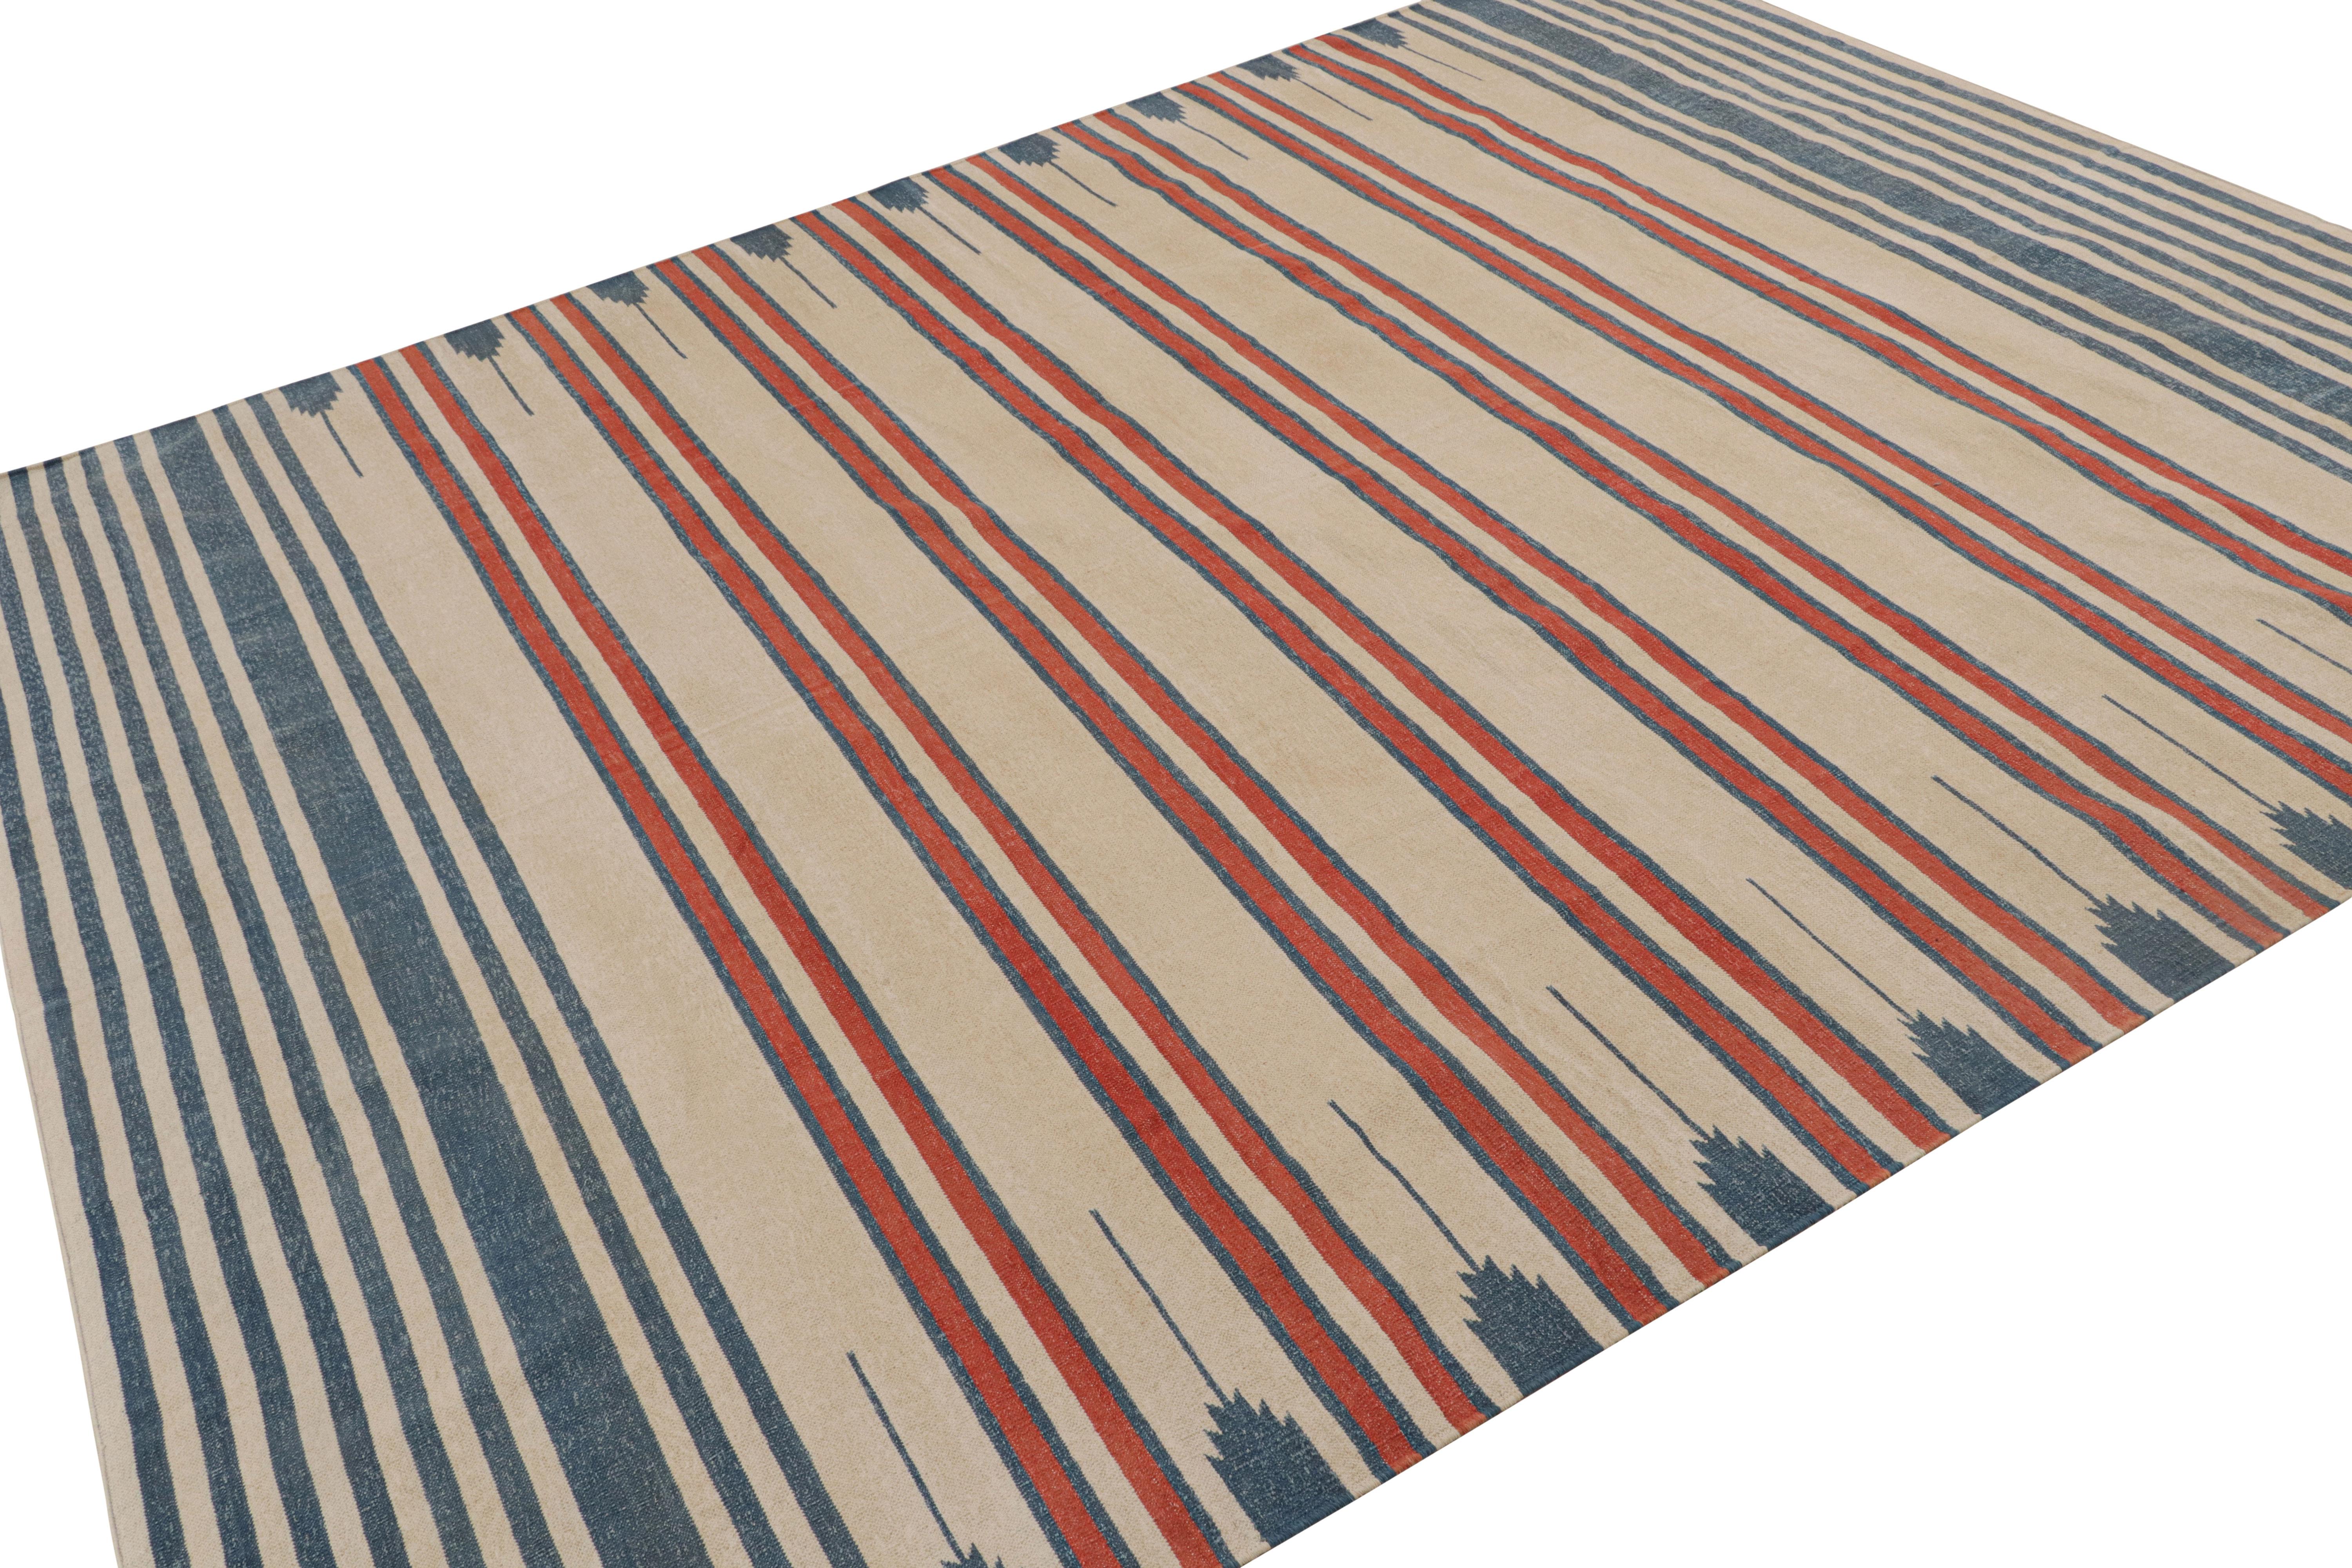 Indian Rug & Kilim’s Contemporary Dhurrie Rug with Beige, Red, Blue Stripes Red Accents For Sale